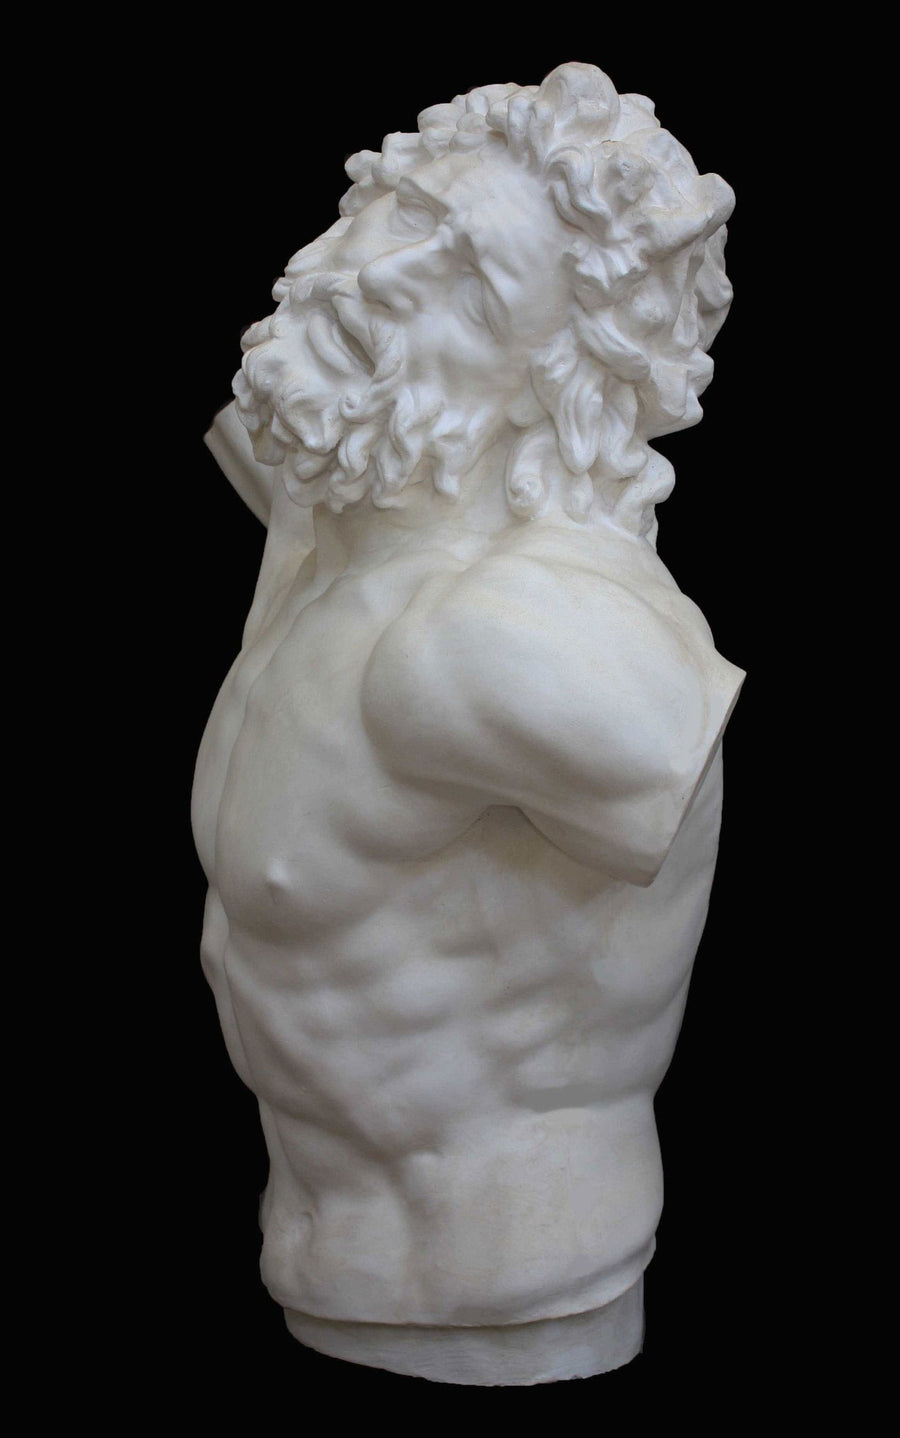 photo with black background of plaster cast of sculpted male torso and head with curly hair and beard, namely Laocoon